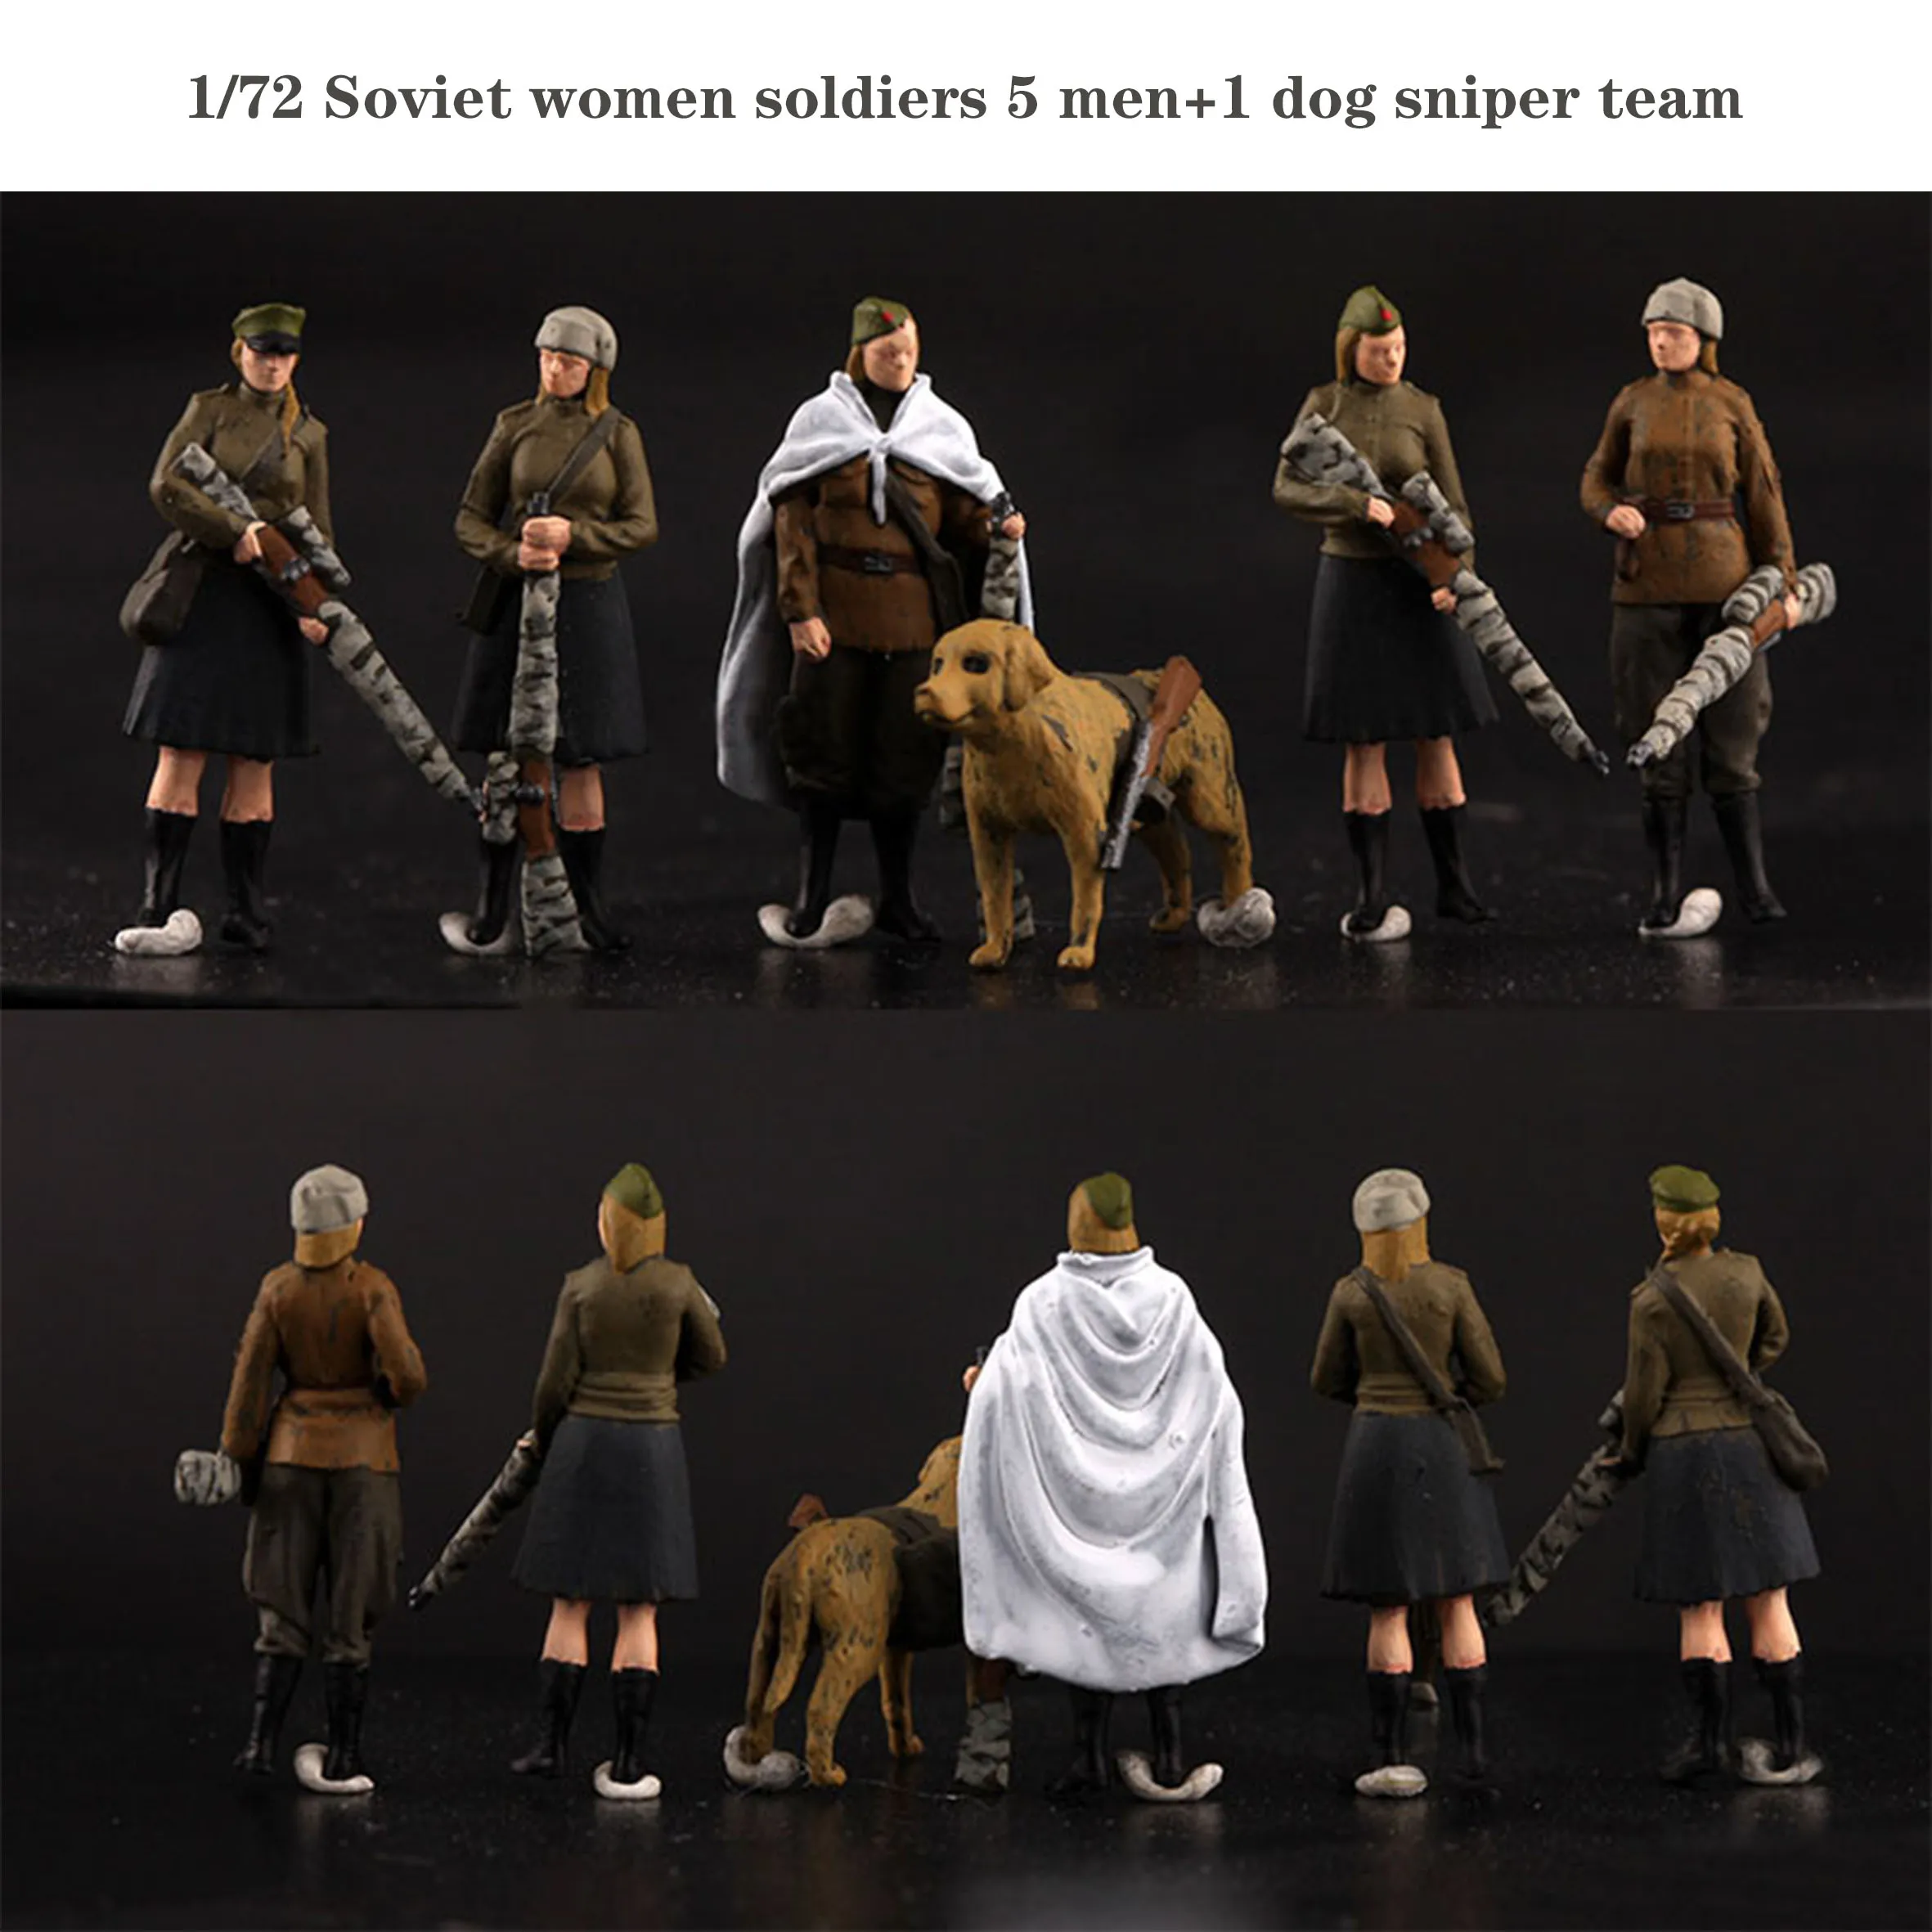 

1/72 Soviet Women Soldiers 5 Men+1 Dog Sniper Team (excluding Tanks) Colored Finished Soldier Model Scale Miniature Model Union